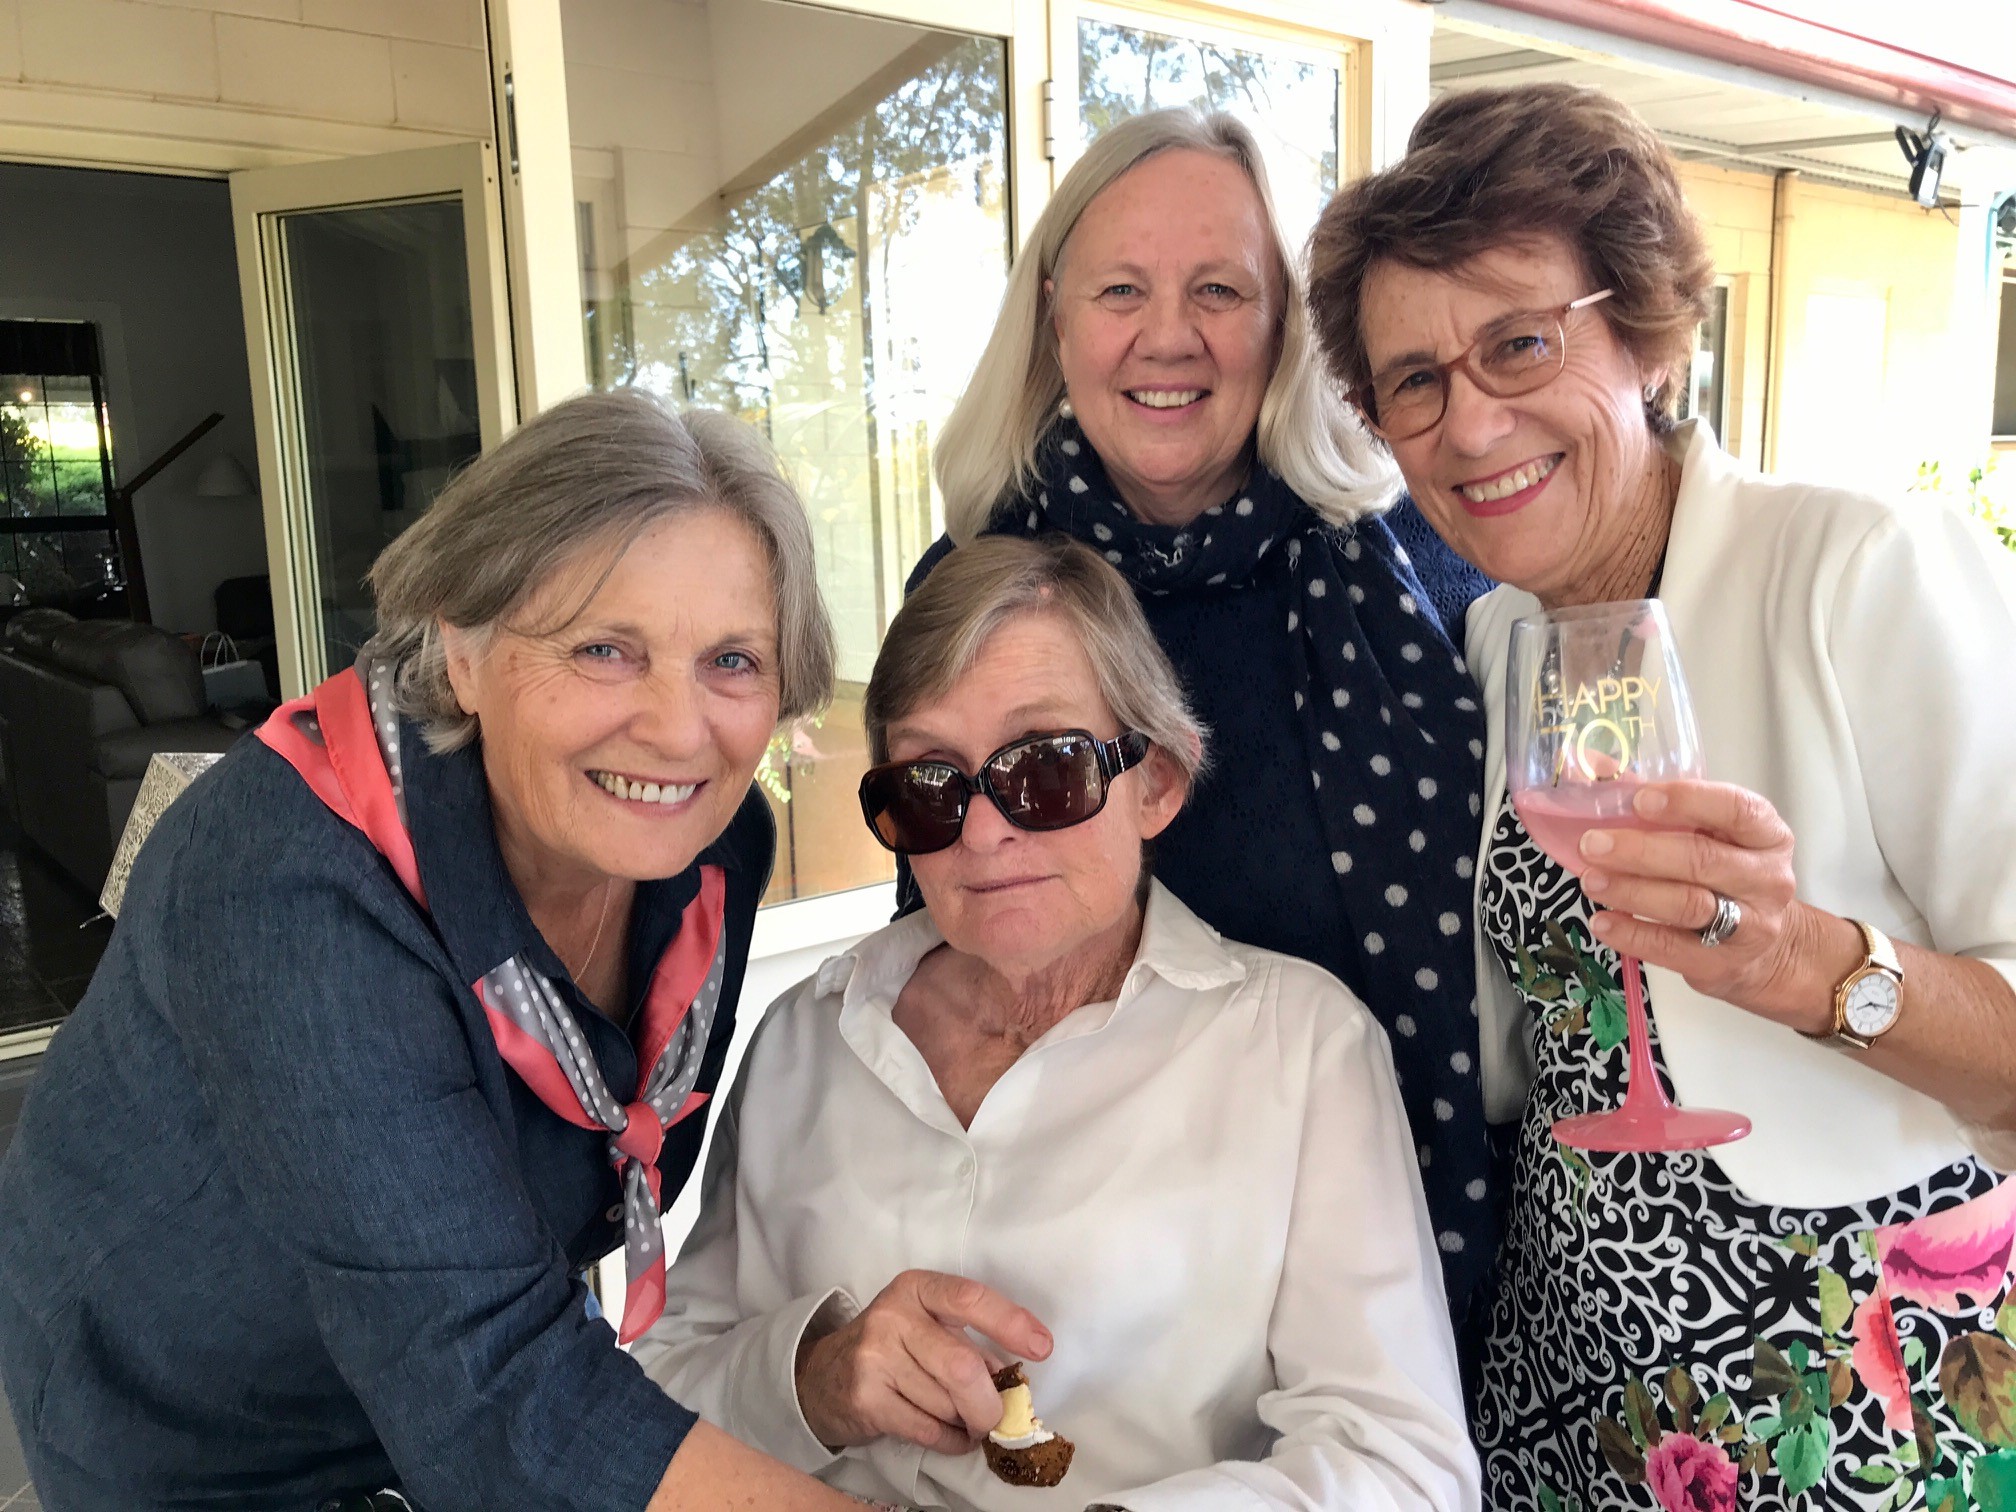 Hostess at the Bethungra Belles party Georgie Murray with Jill Ison, Lynda George and Jacqui Warnock.